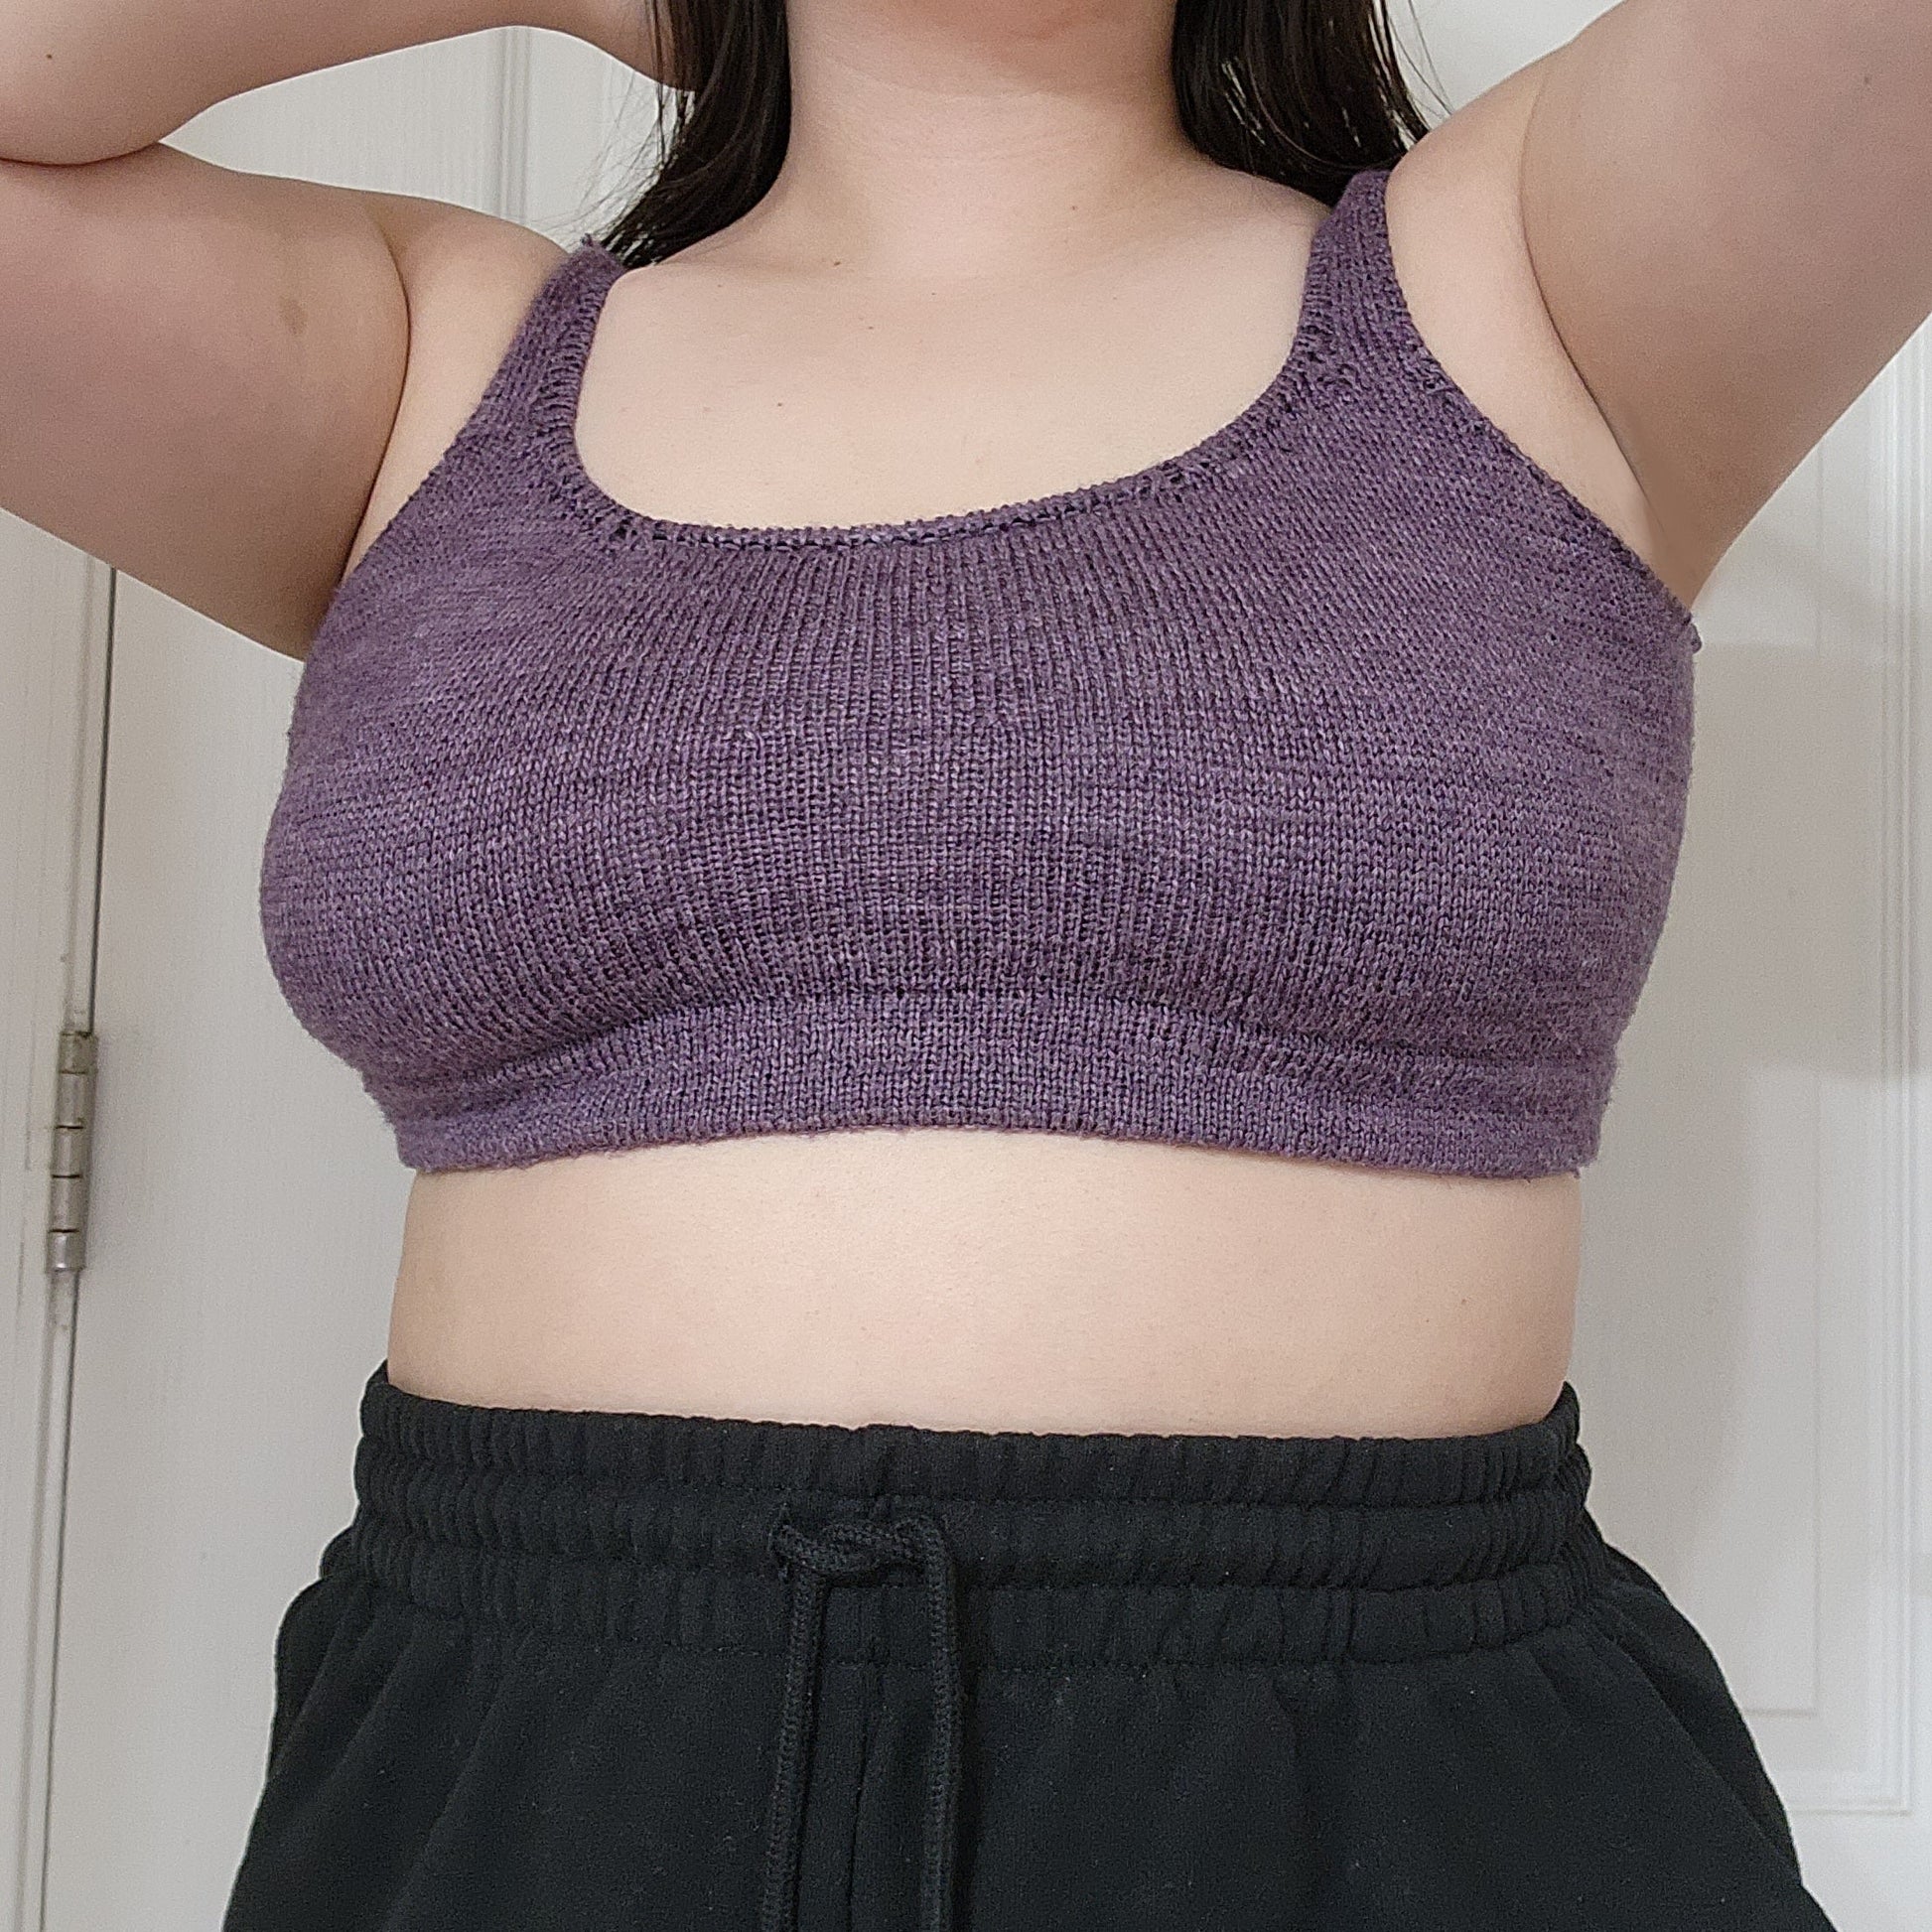 Jordynn, wearing a deep purple, hand knit bralette, is seen from the shoulders down. She has both hands in her black hair, and wears a pair of black sweatpants.